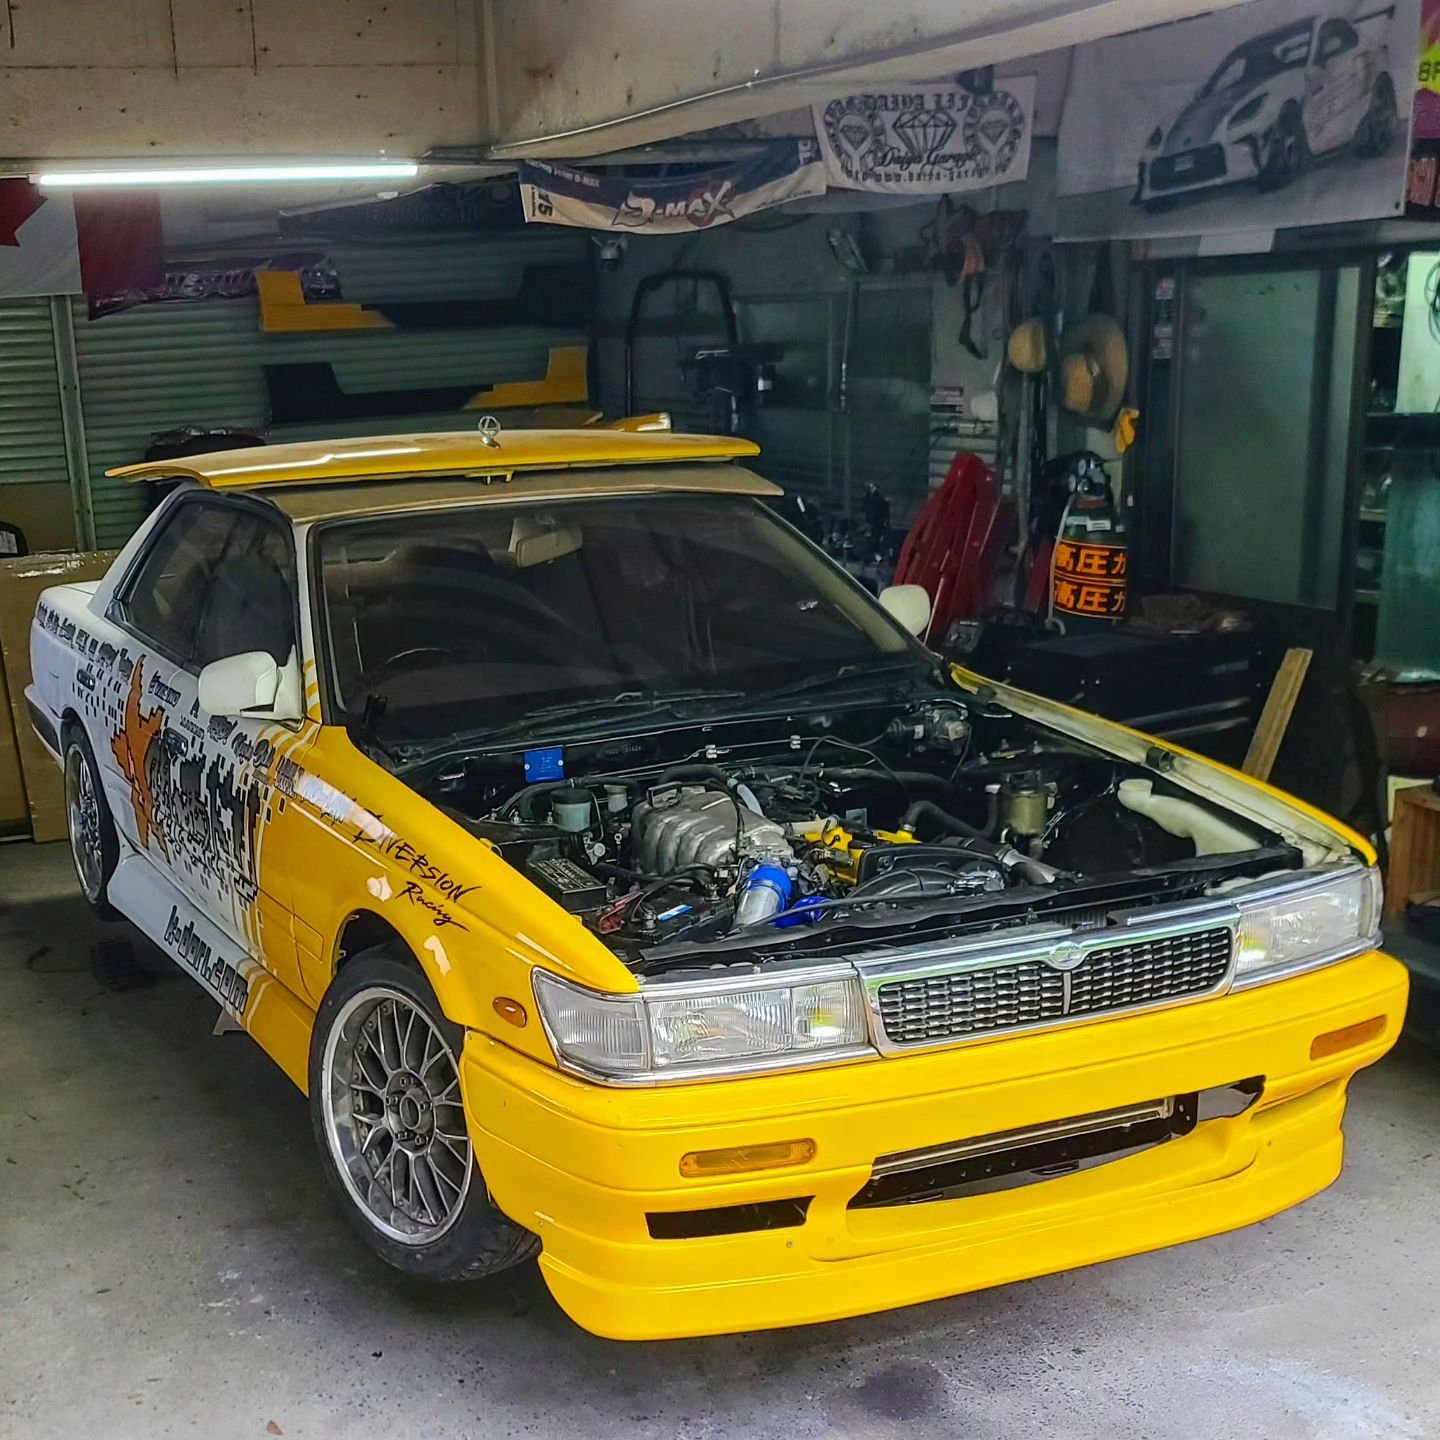 ⭐️ K-dori laurel is getting super close to up n running.. interested to see how this car feels to drive and if the ol twennydet is up for a new life on the circuit ☺️👌
Big ups @kdori.mirza @satomml for your help with this build and @stackedexports_i